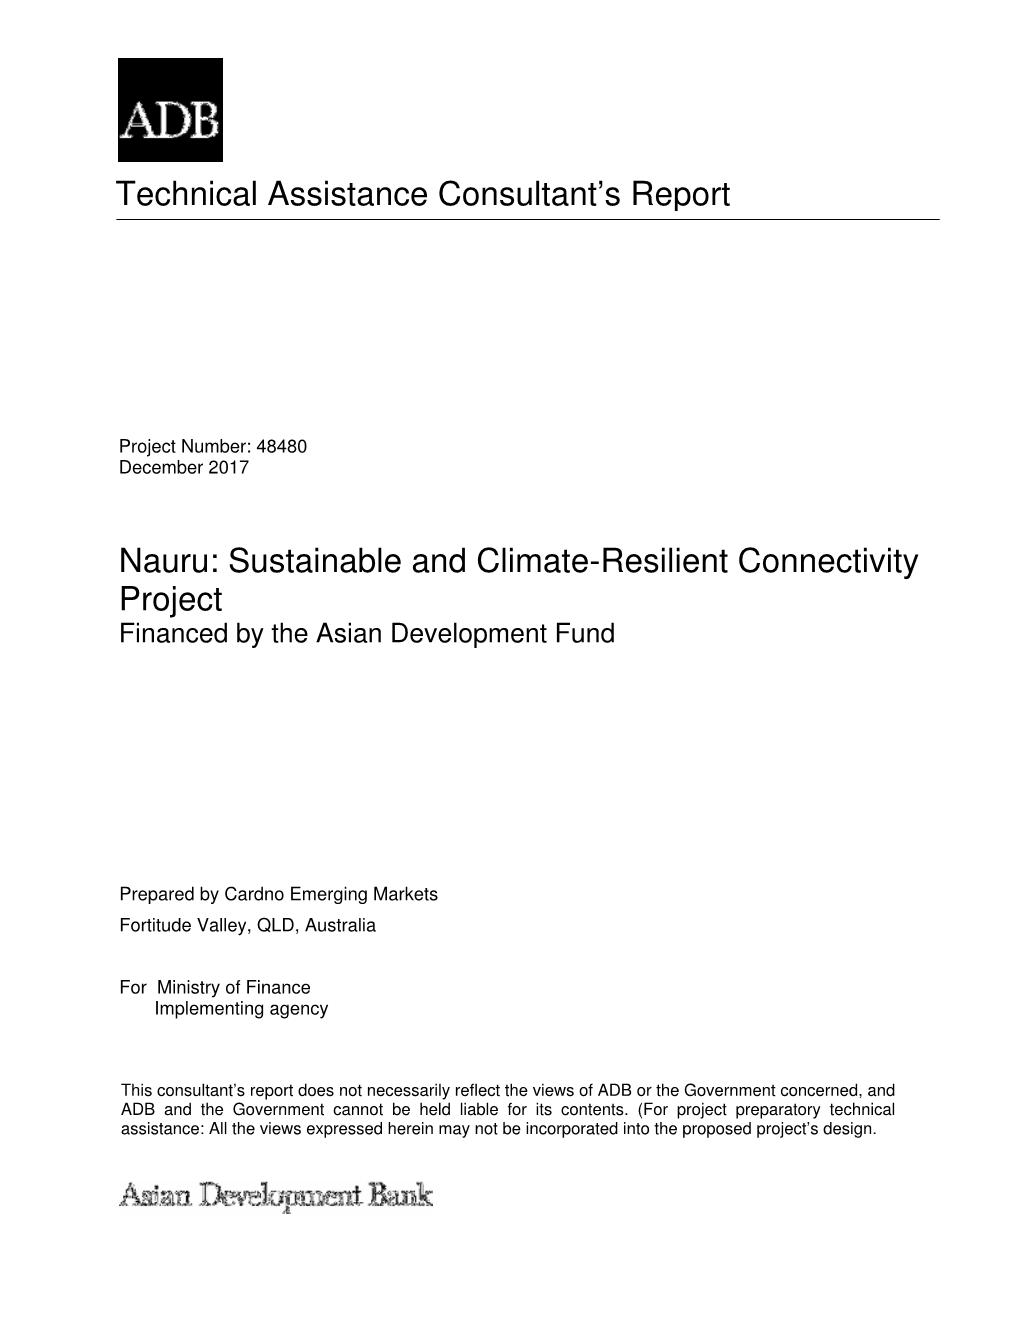 Technical Assistance Consultant's Report Nauru: Sustainable And